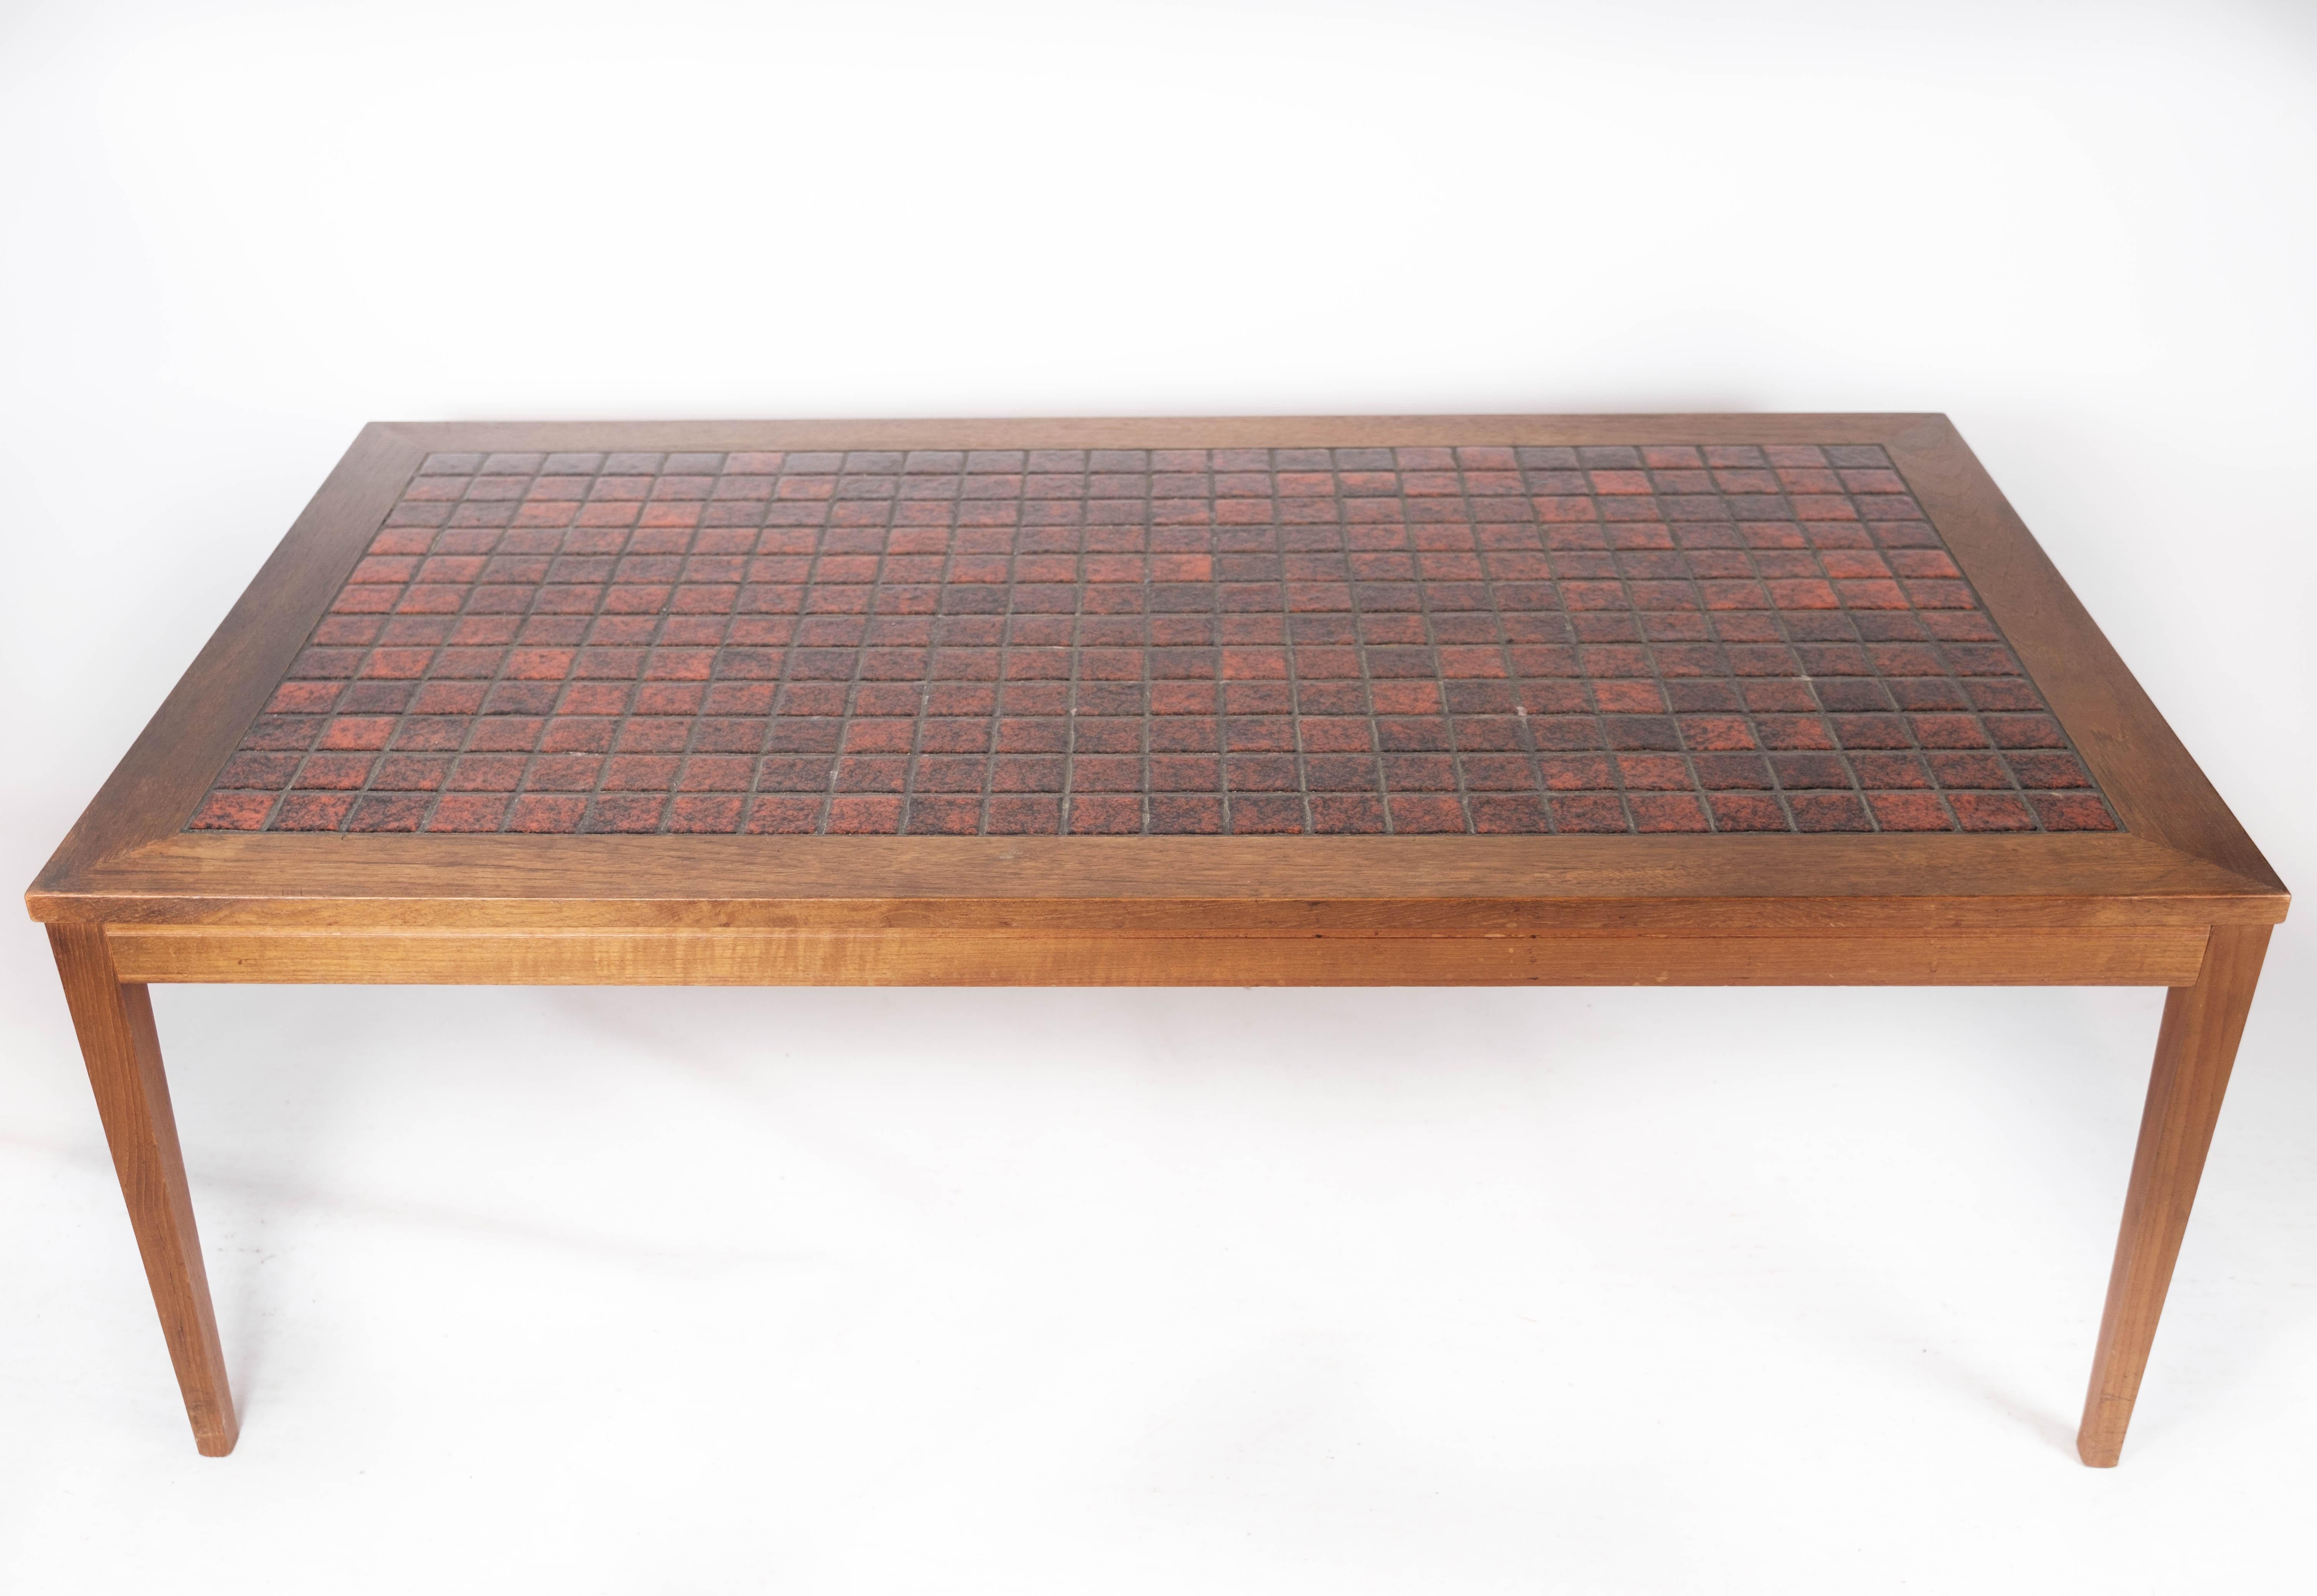 Crafted from teak wood and adorned with vibrant red tiles, this coffee table epitomizes the iconic Danish design of the 1960s. Its sleek lines and minimalist silhouette reflect the era's emphasis on functional yet stylish furniture.

Despite its